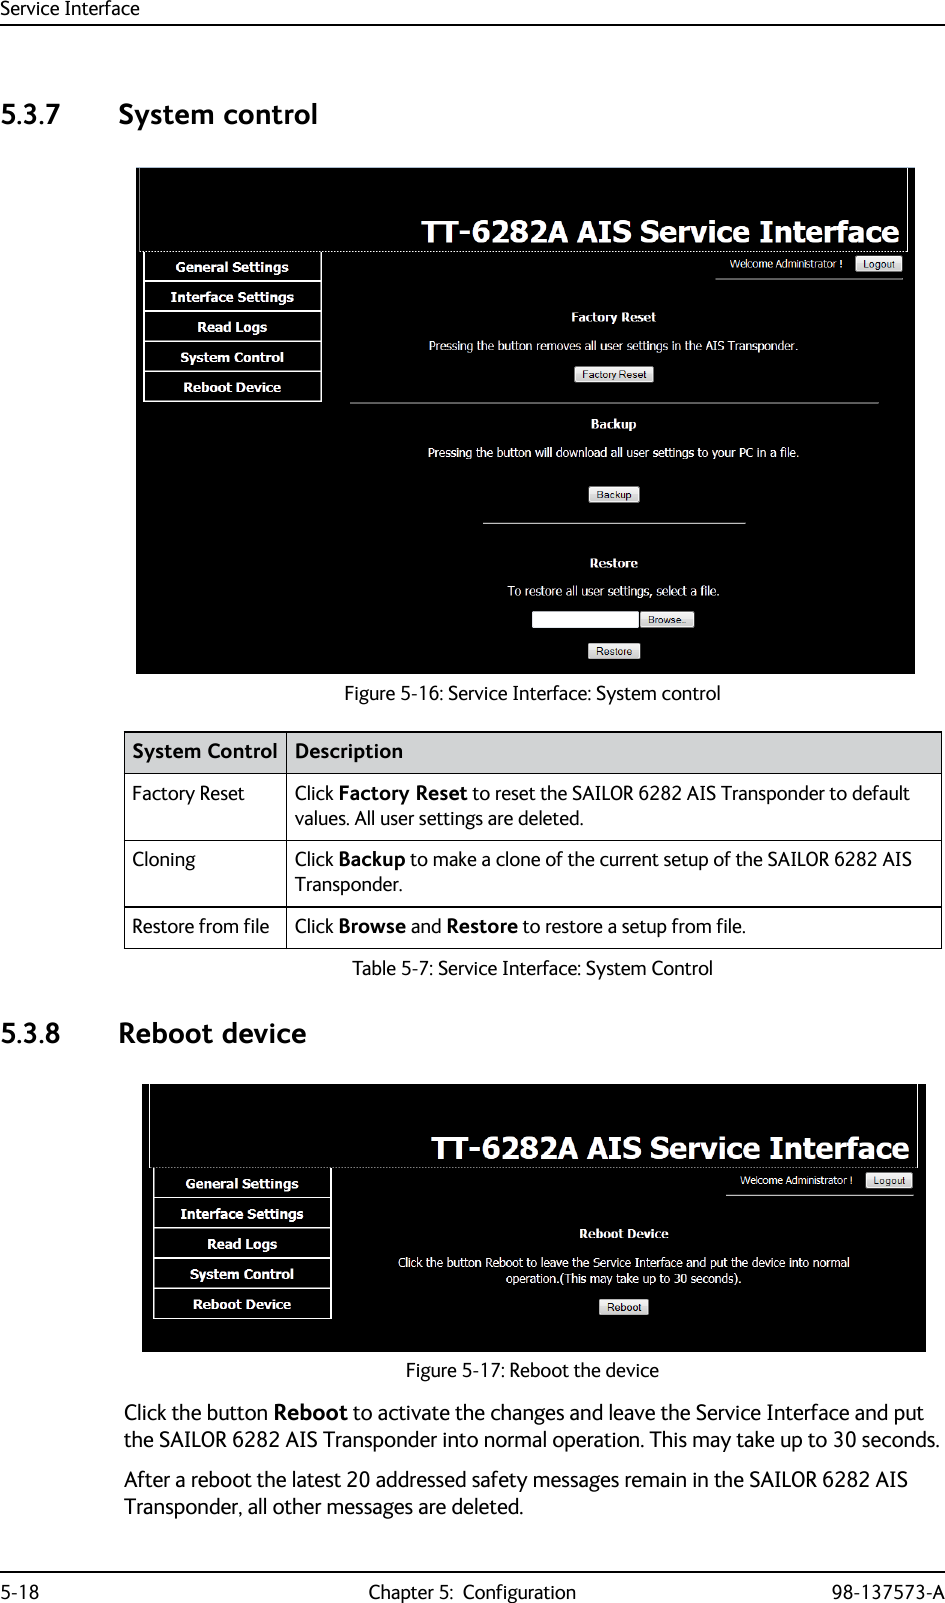 Service Interface5-18 Chapter 5:  Configuration 98-137573-A5.3.7 System control5.3.8 Reboot deviceClick the button Reboot to activate the changes and leave the Service Interface and put the SAILOR 6282 AIS Transponder into normal operation. This may take up to 30 seconds.After a reboot the latest 20 addressed safety messages remain in the SAILOR 6282 AIS Transponder, all other messages are deleted.Figure 5-16: Service Interface: System controlSystem Control DescriptionFactory Reset Click Factory Reset to reset the SAILOR 6282 AIS Transponder to default values. All user settings are deleted.Cloning Click Backup to make a clone of the current setup of the SAILOR 6282 AIS Transponder.Restore from file Click Browse and Restore to restore a setup from file.Table 5-7: Service Interface: System ControlFigure 5-17: Reboot the device